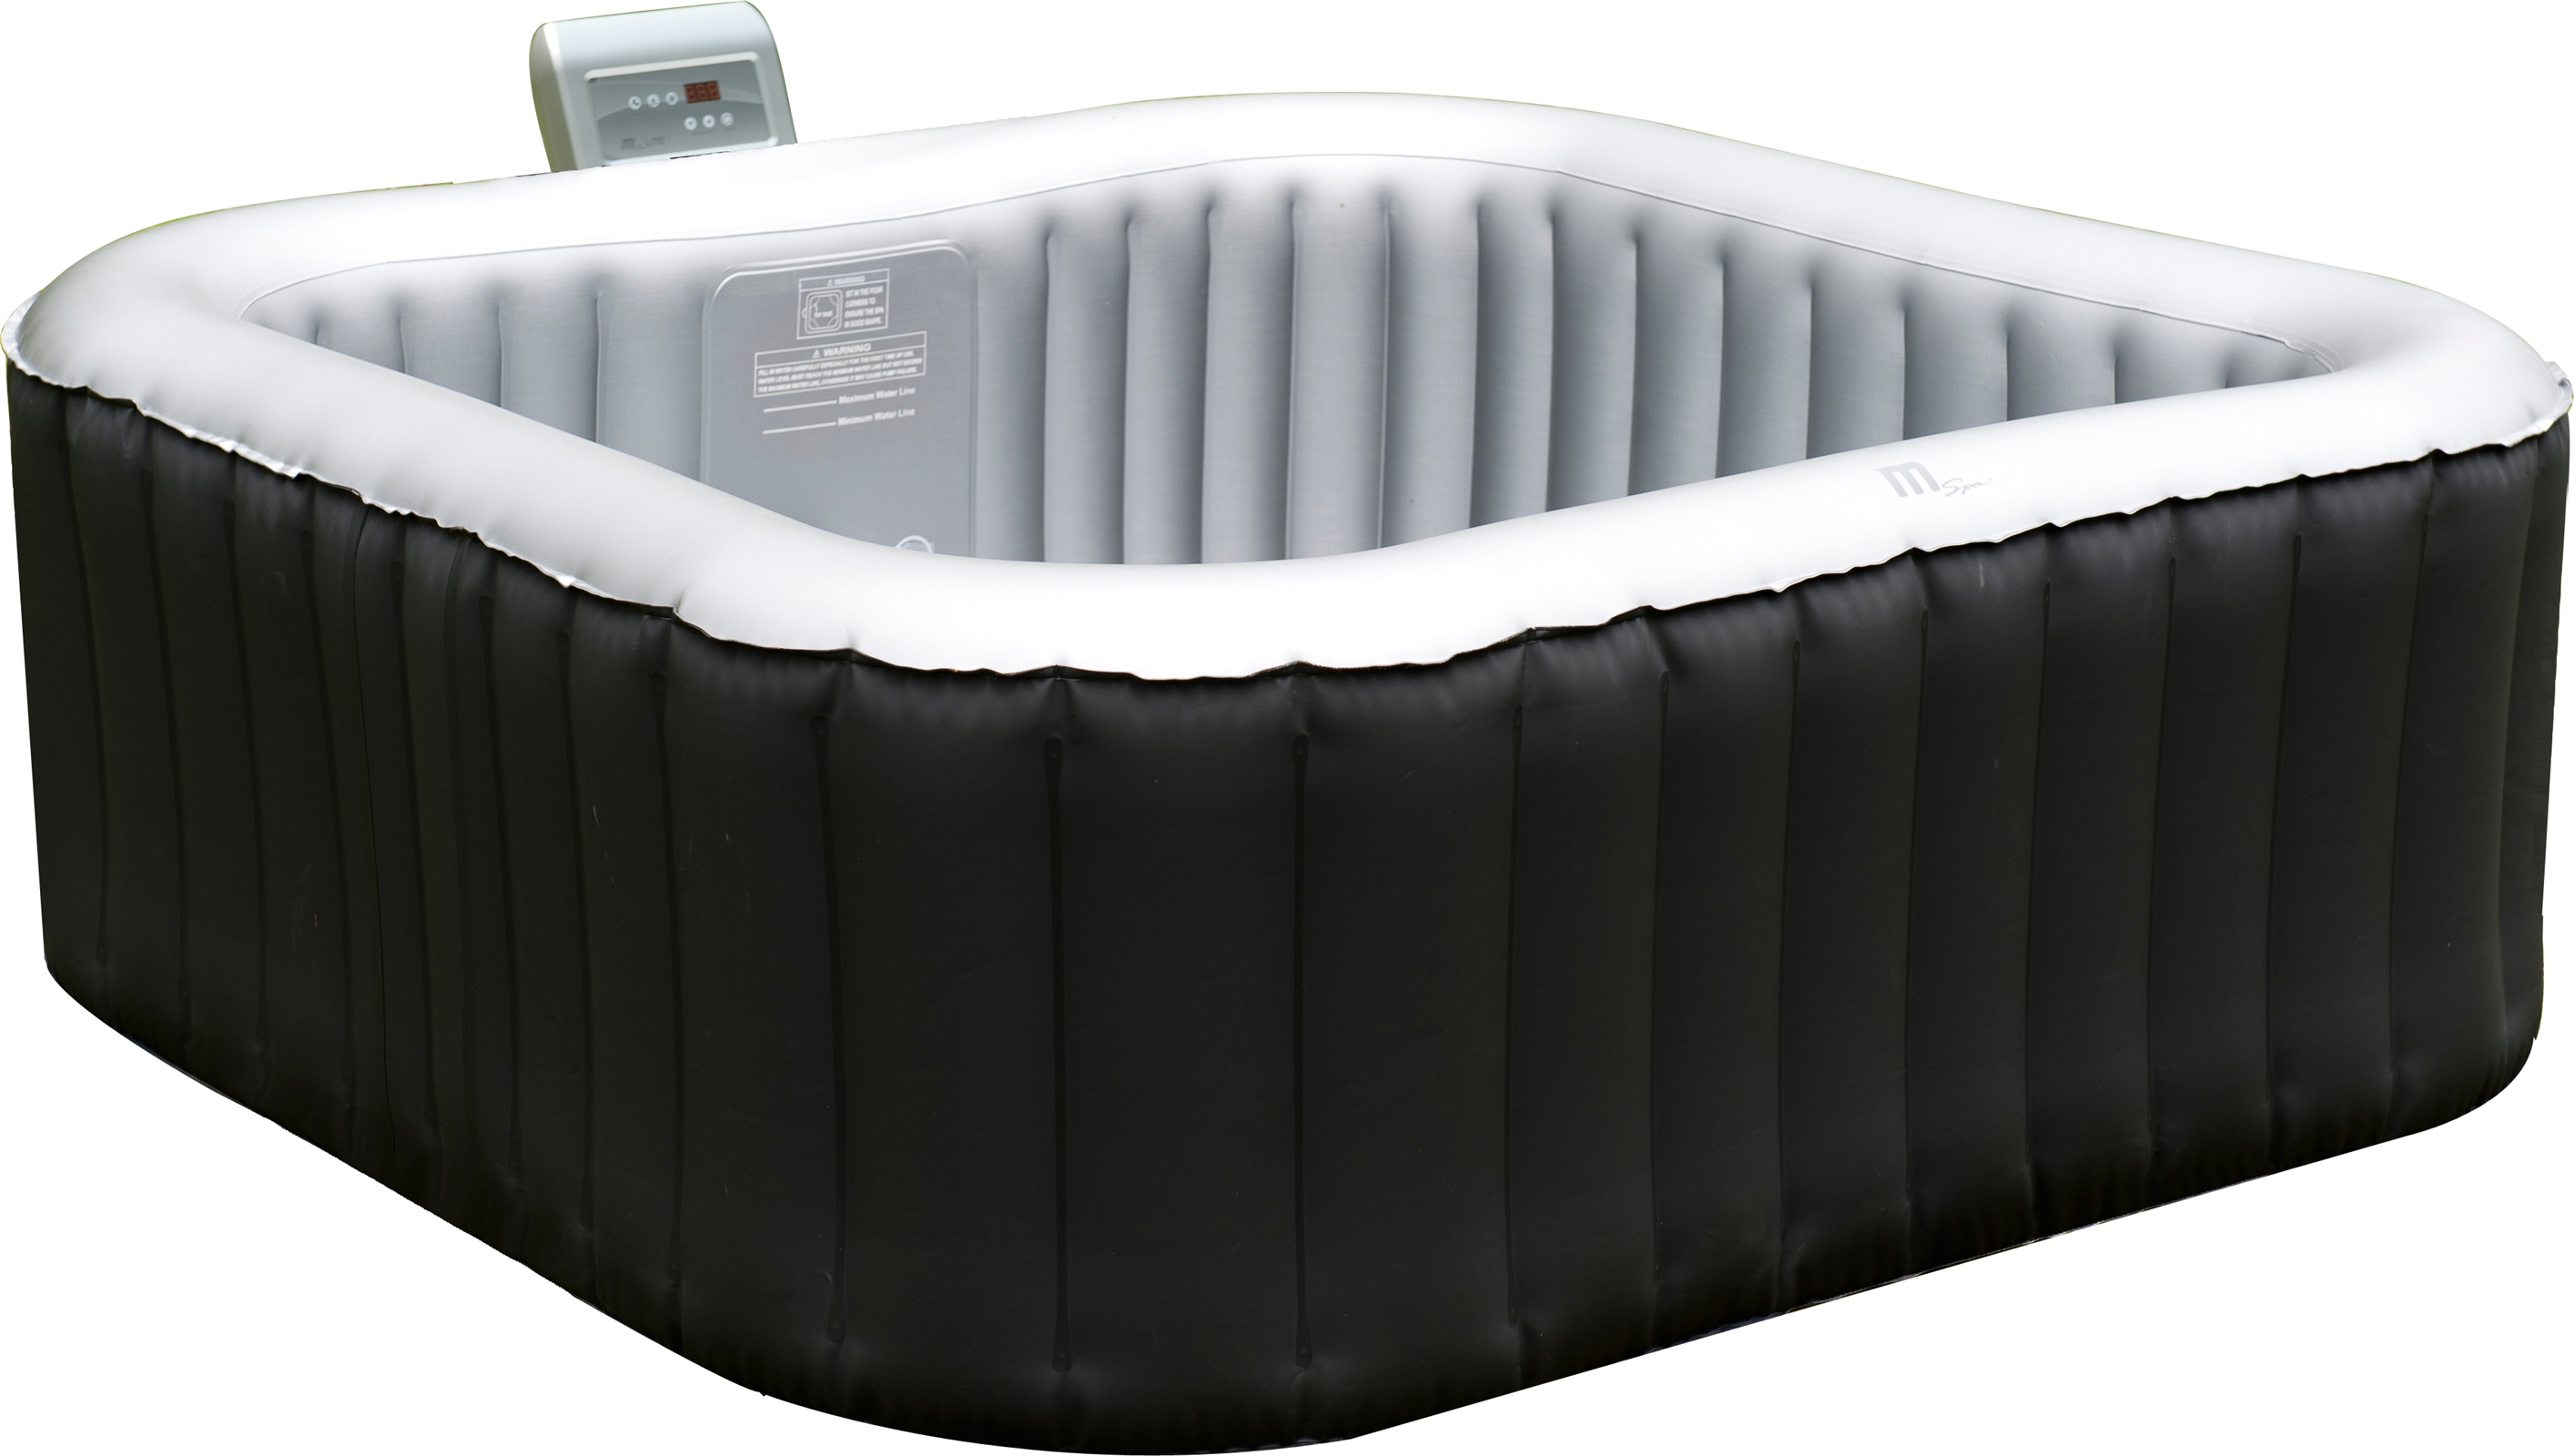 Mspa Alpine Lite Square Portable Hot Tub 6 Seater £395 Free Delivery Hot Tub And Hot Tub